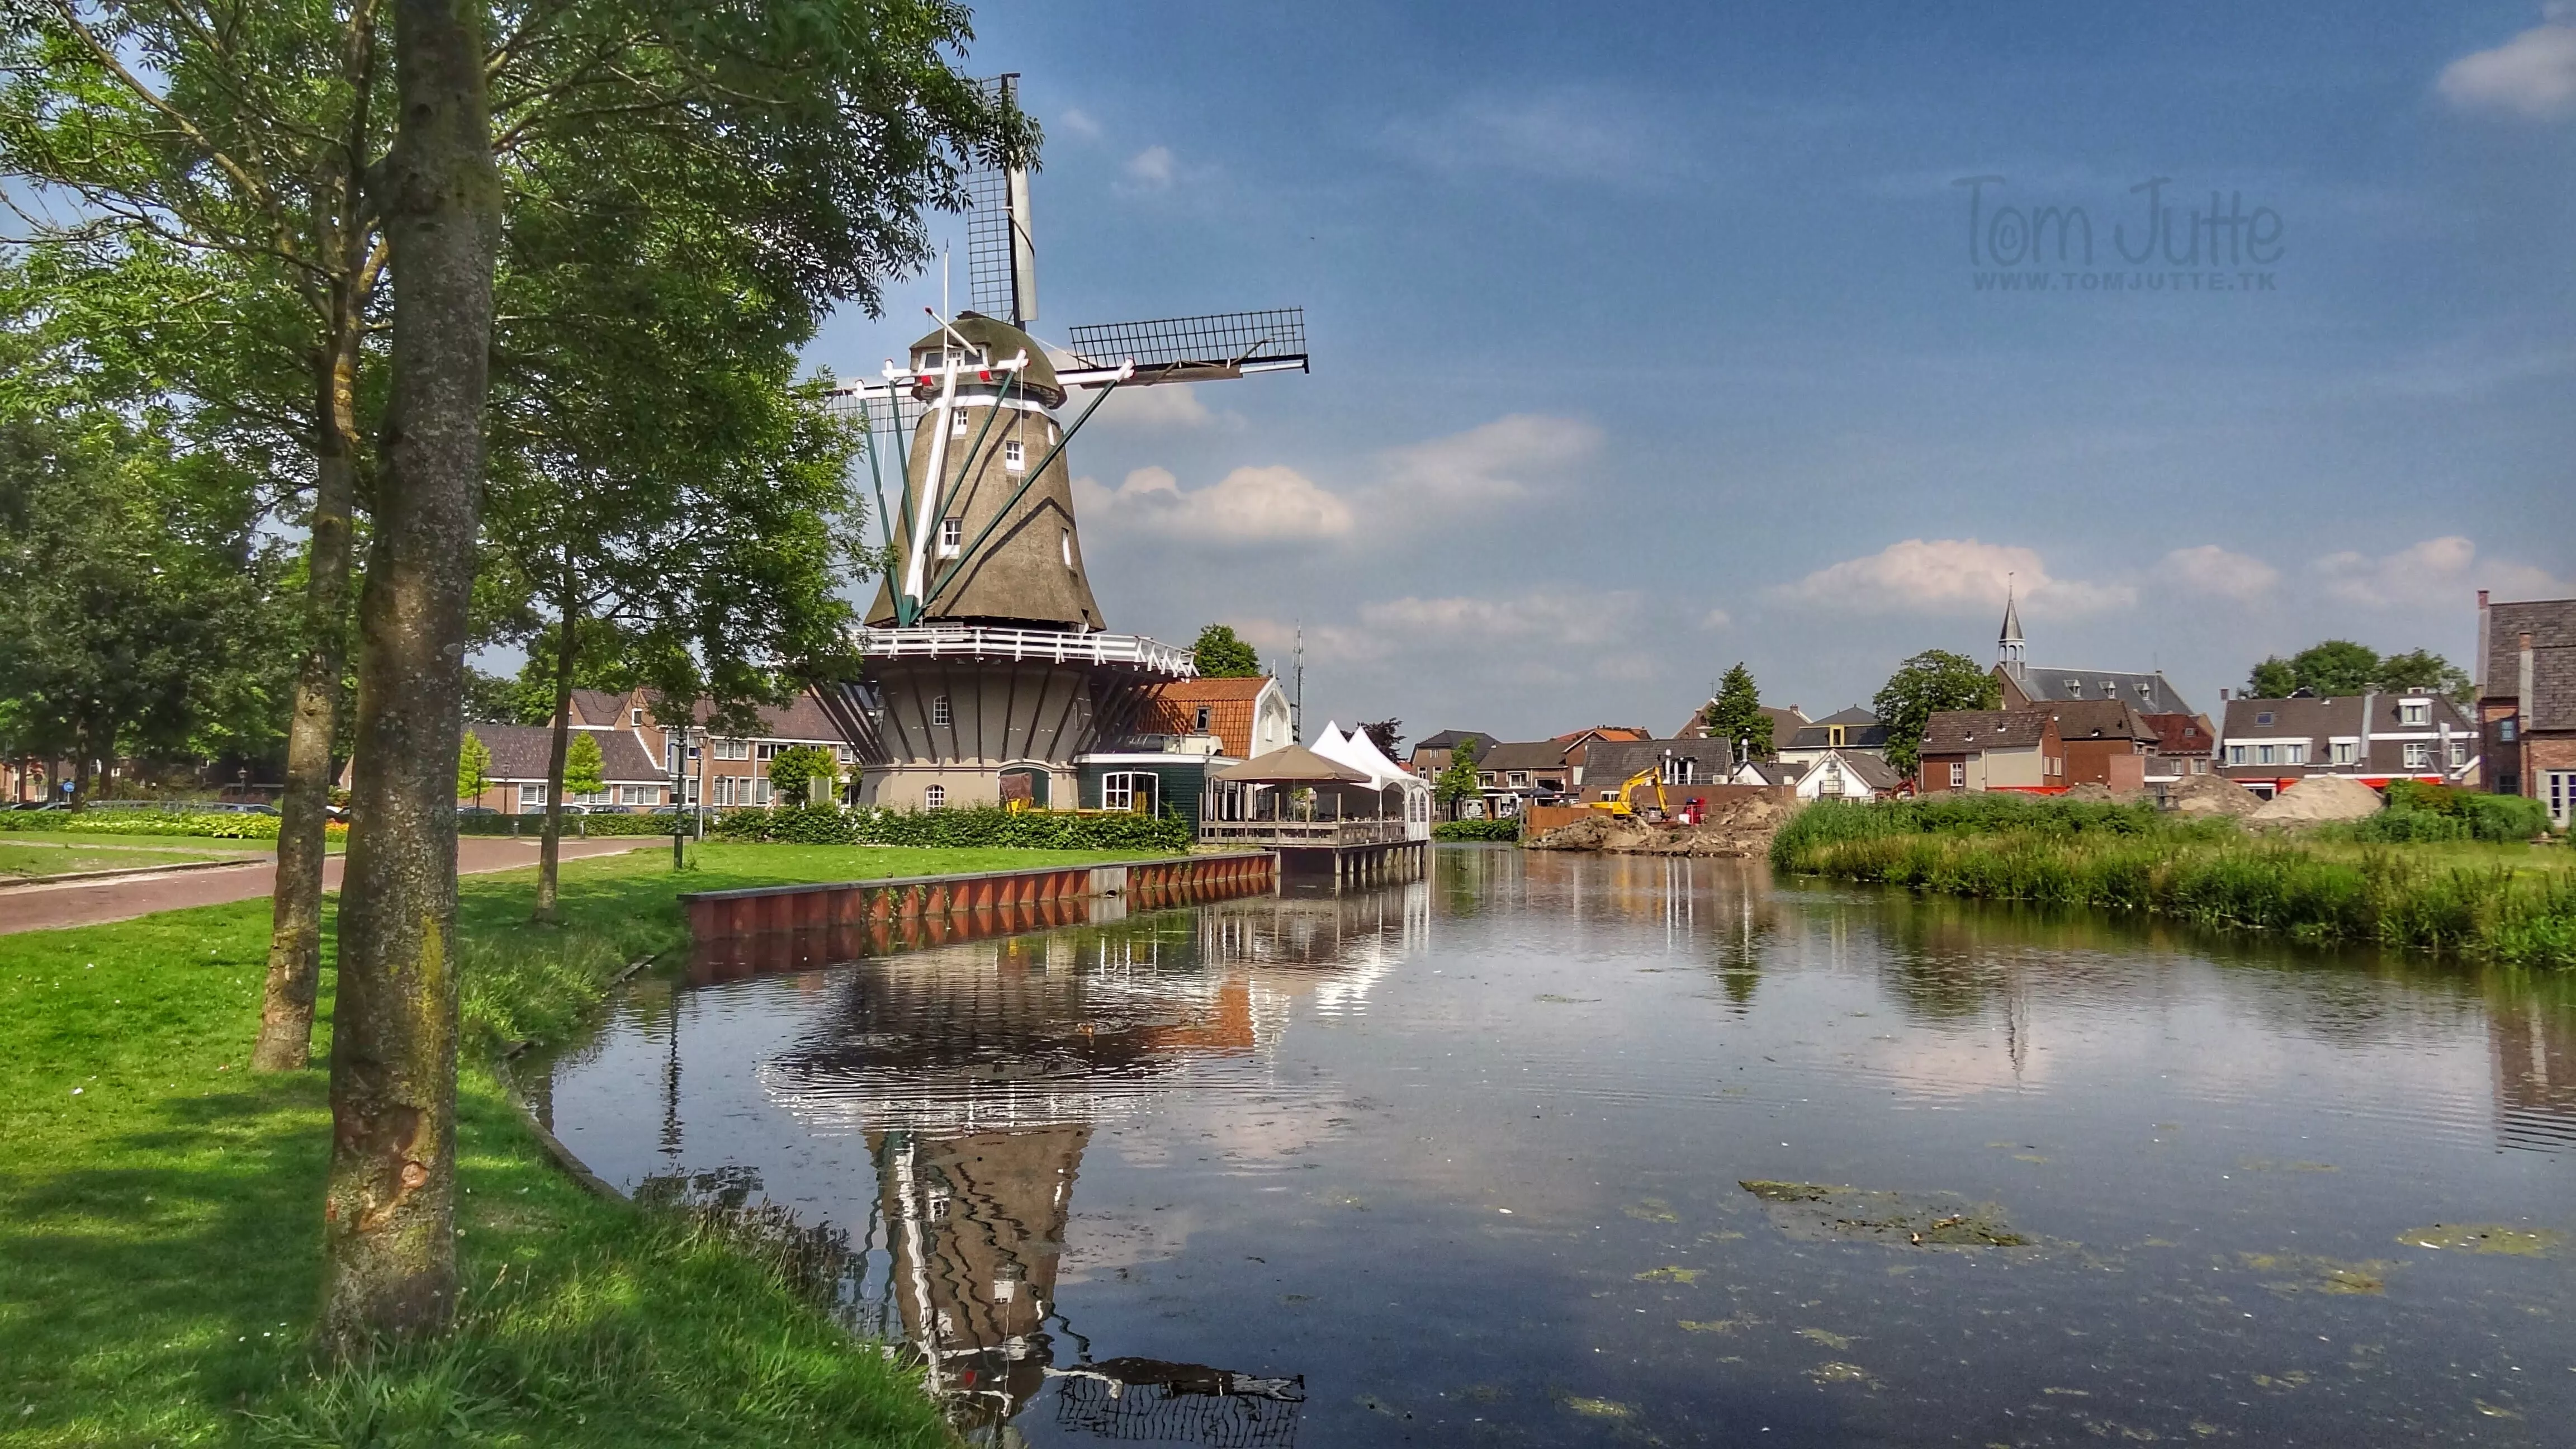 Spakenburg Windmill in Netherlands, Europe | Architecture - Rated 0.8